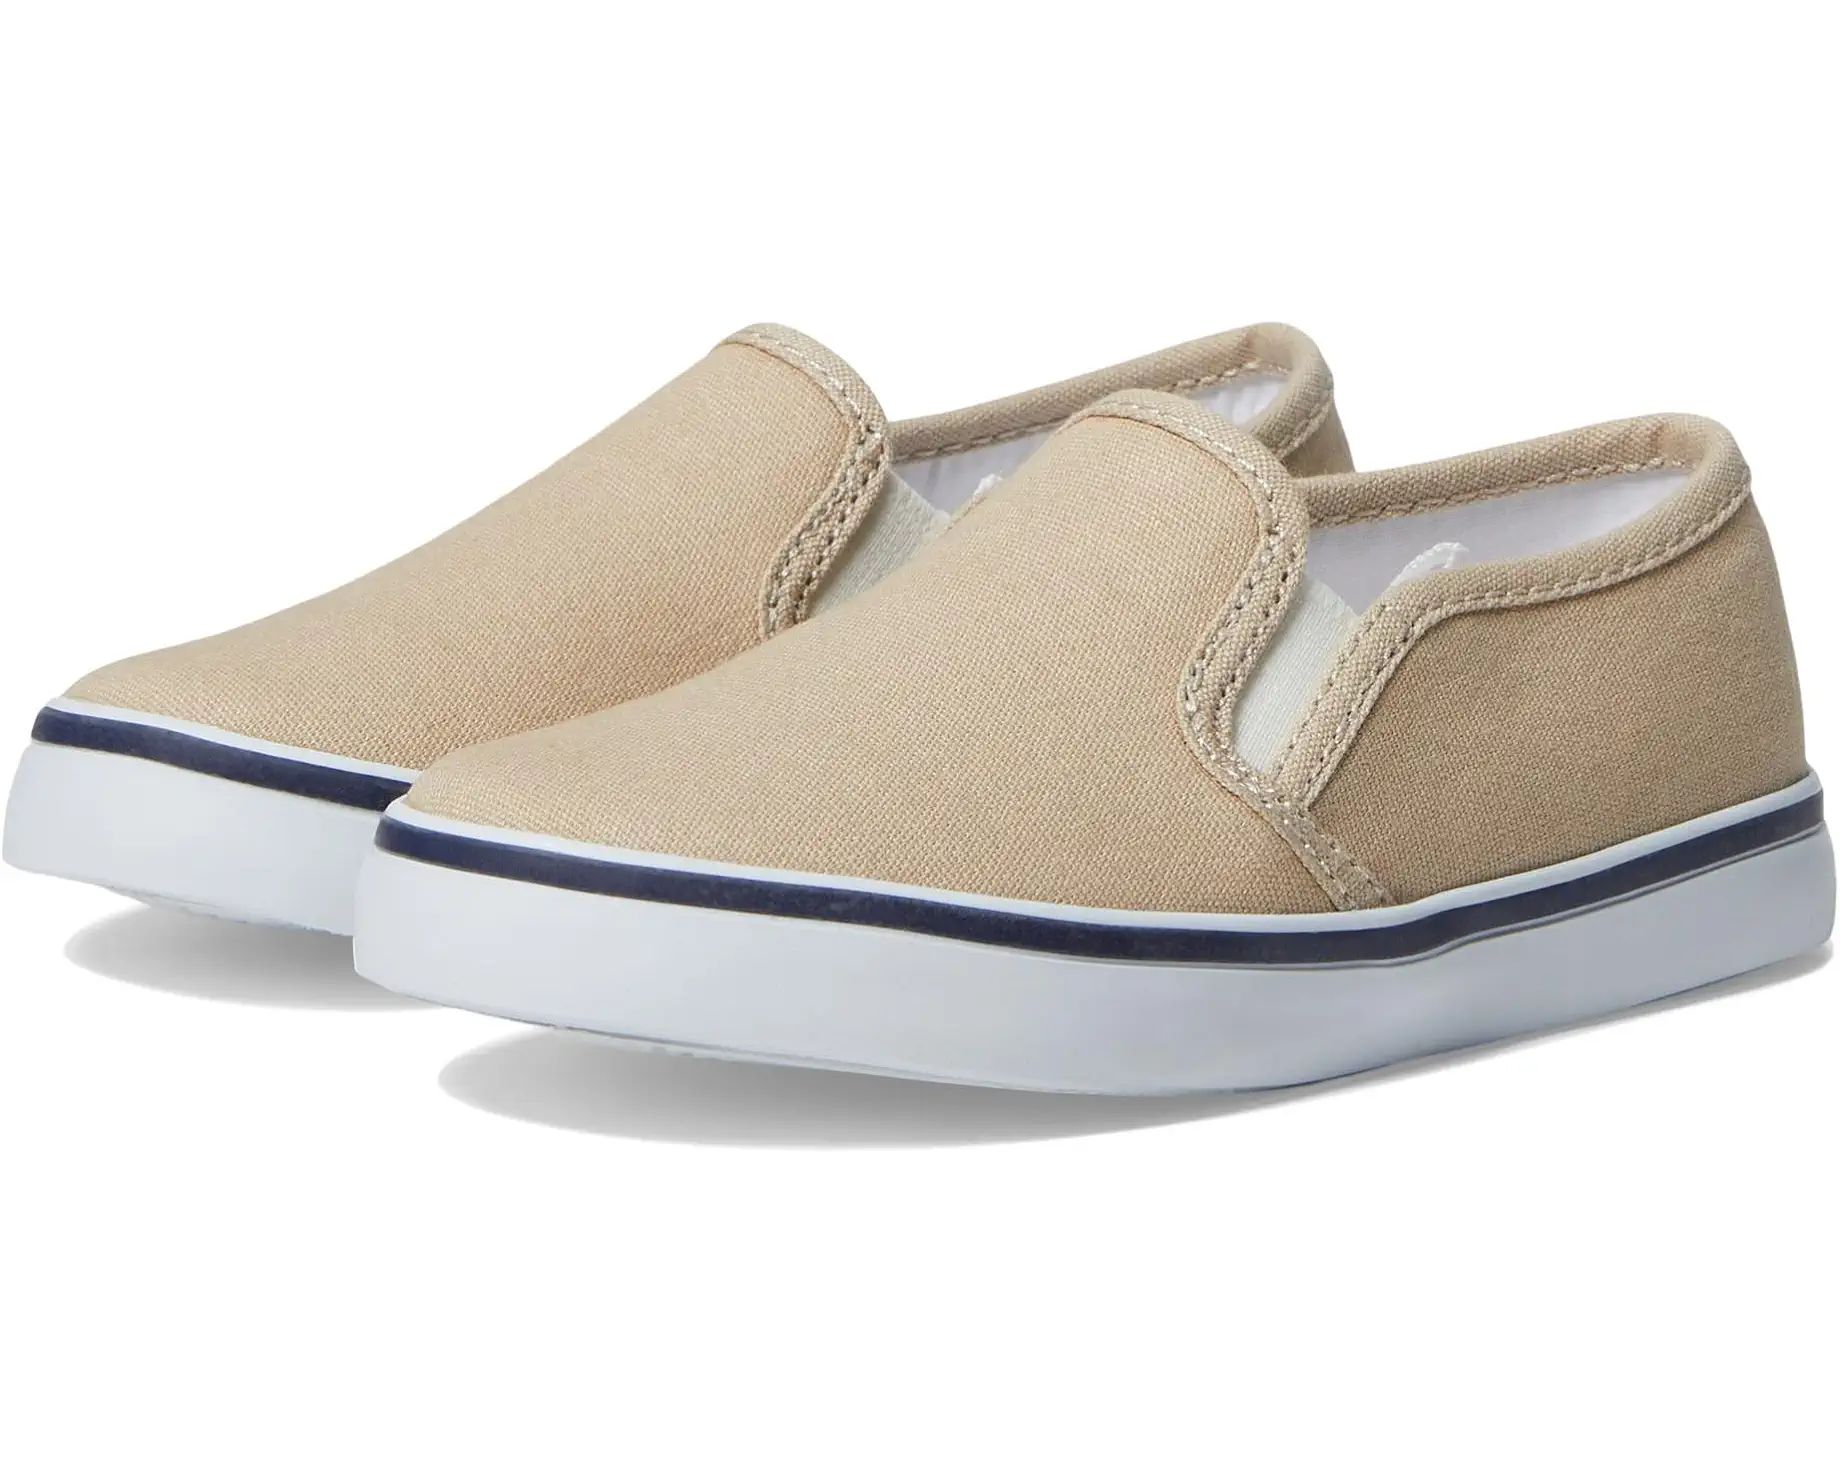 Janie and Jack Linen Slip-On Sneakers (Toddler/Little Kid/Big Kid) | Zappos